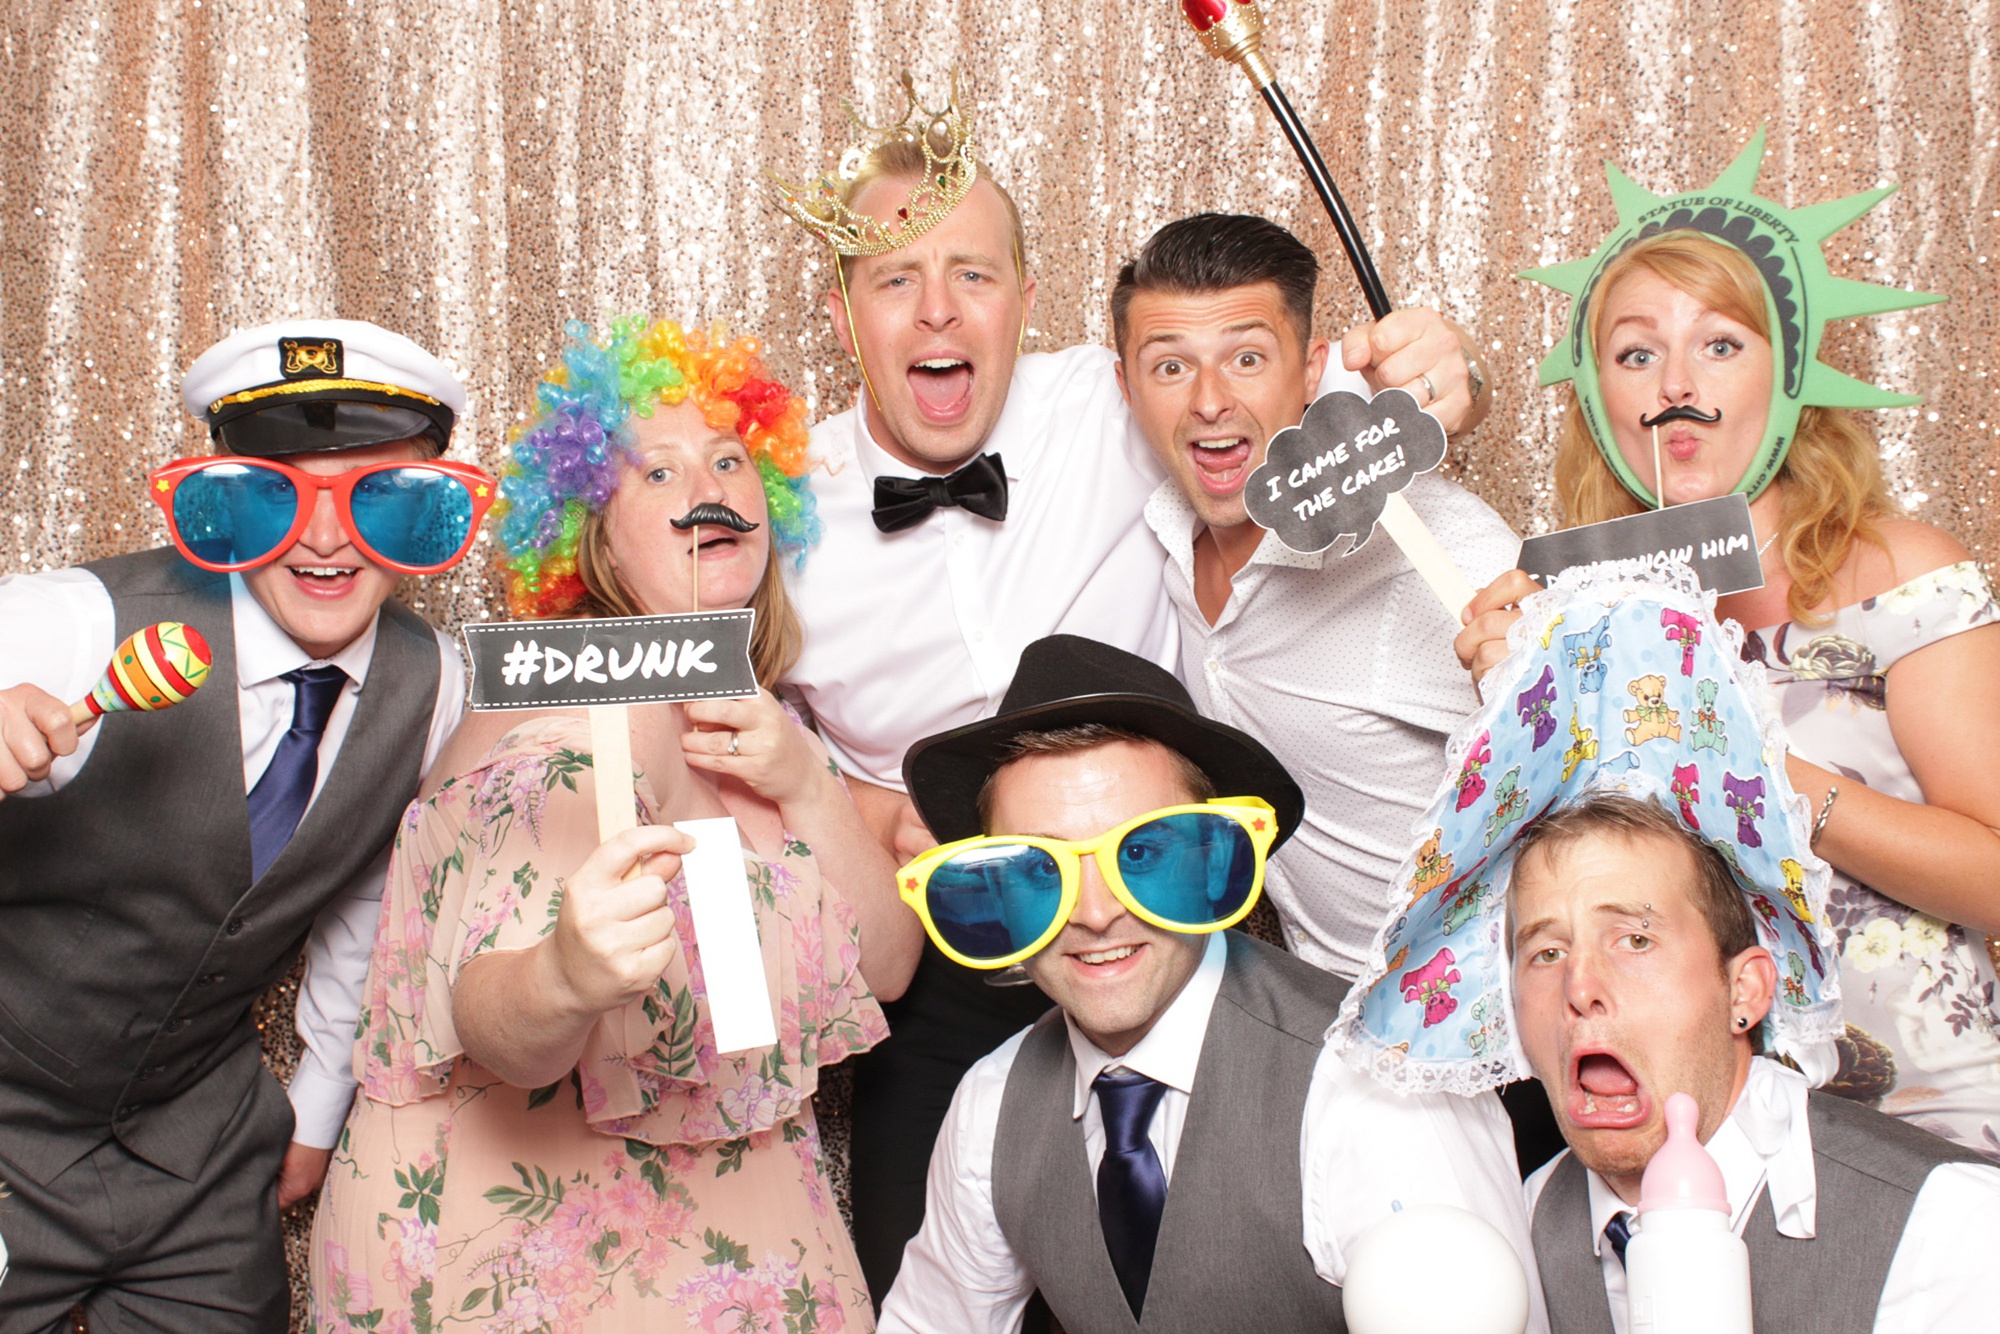 New Jersey wedding reception fun in photo booth